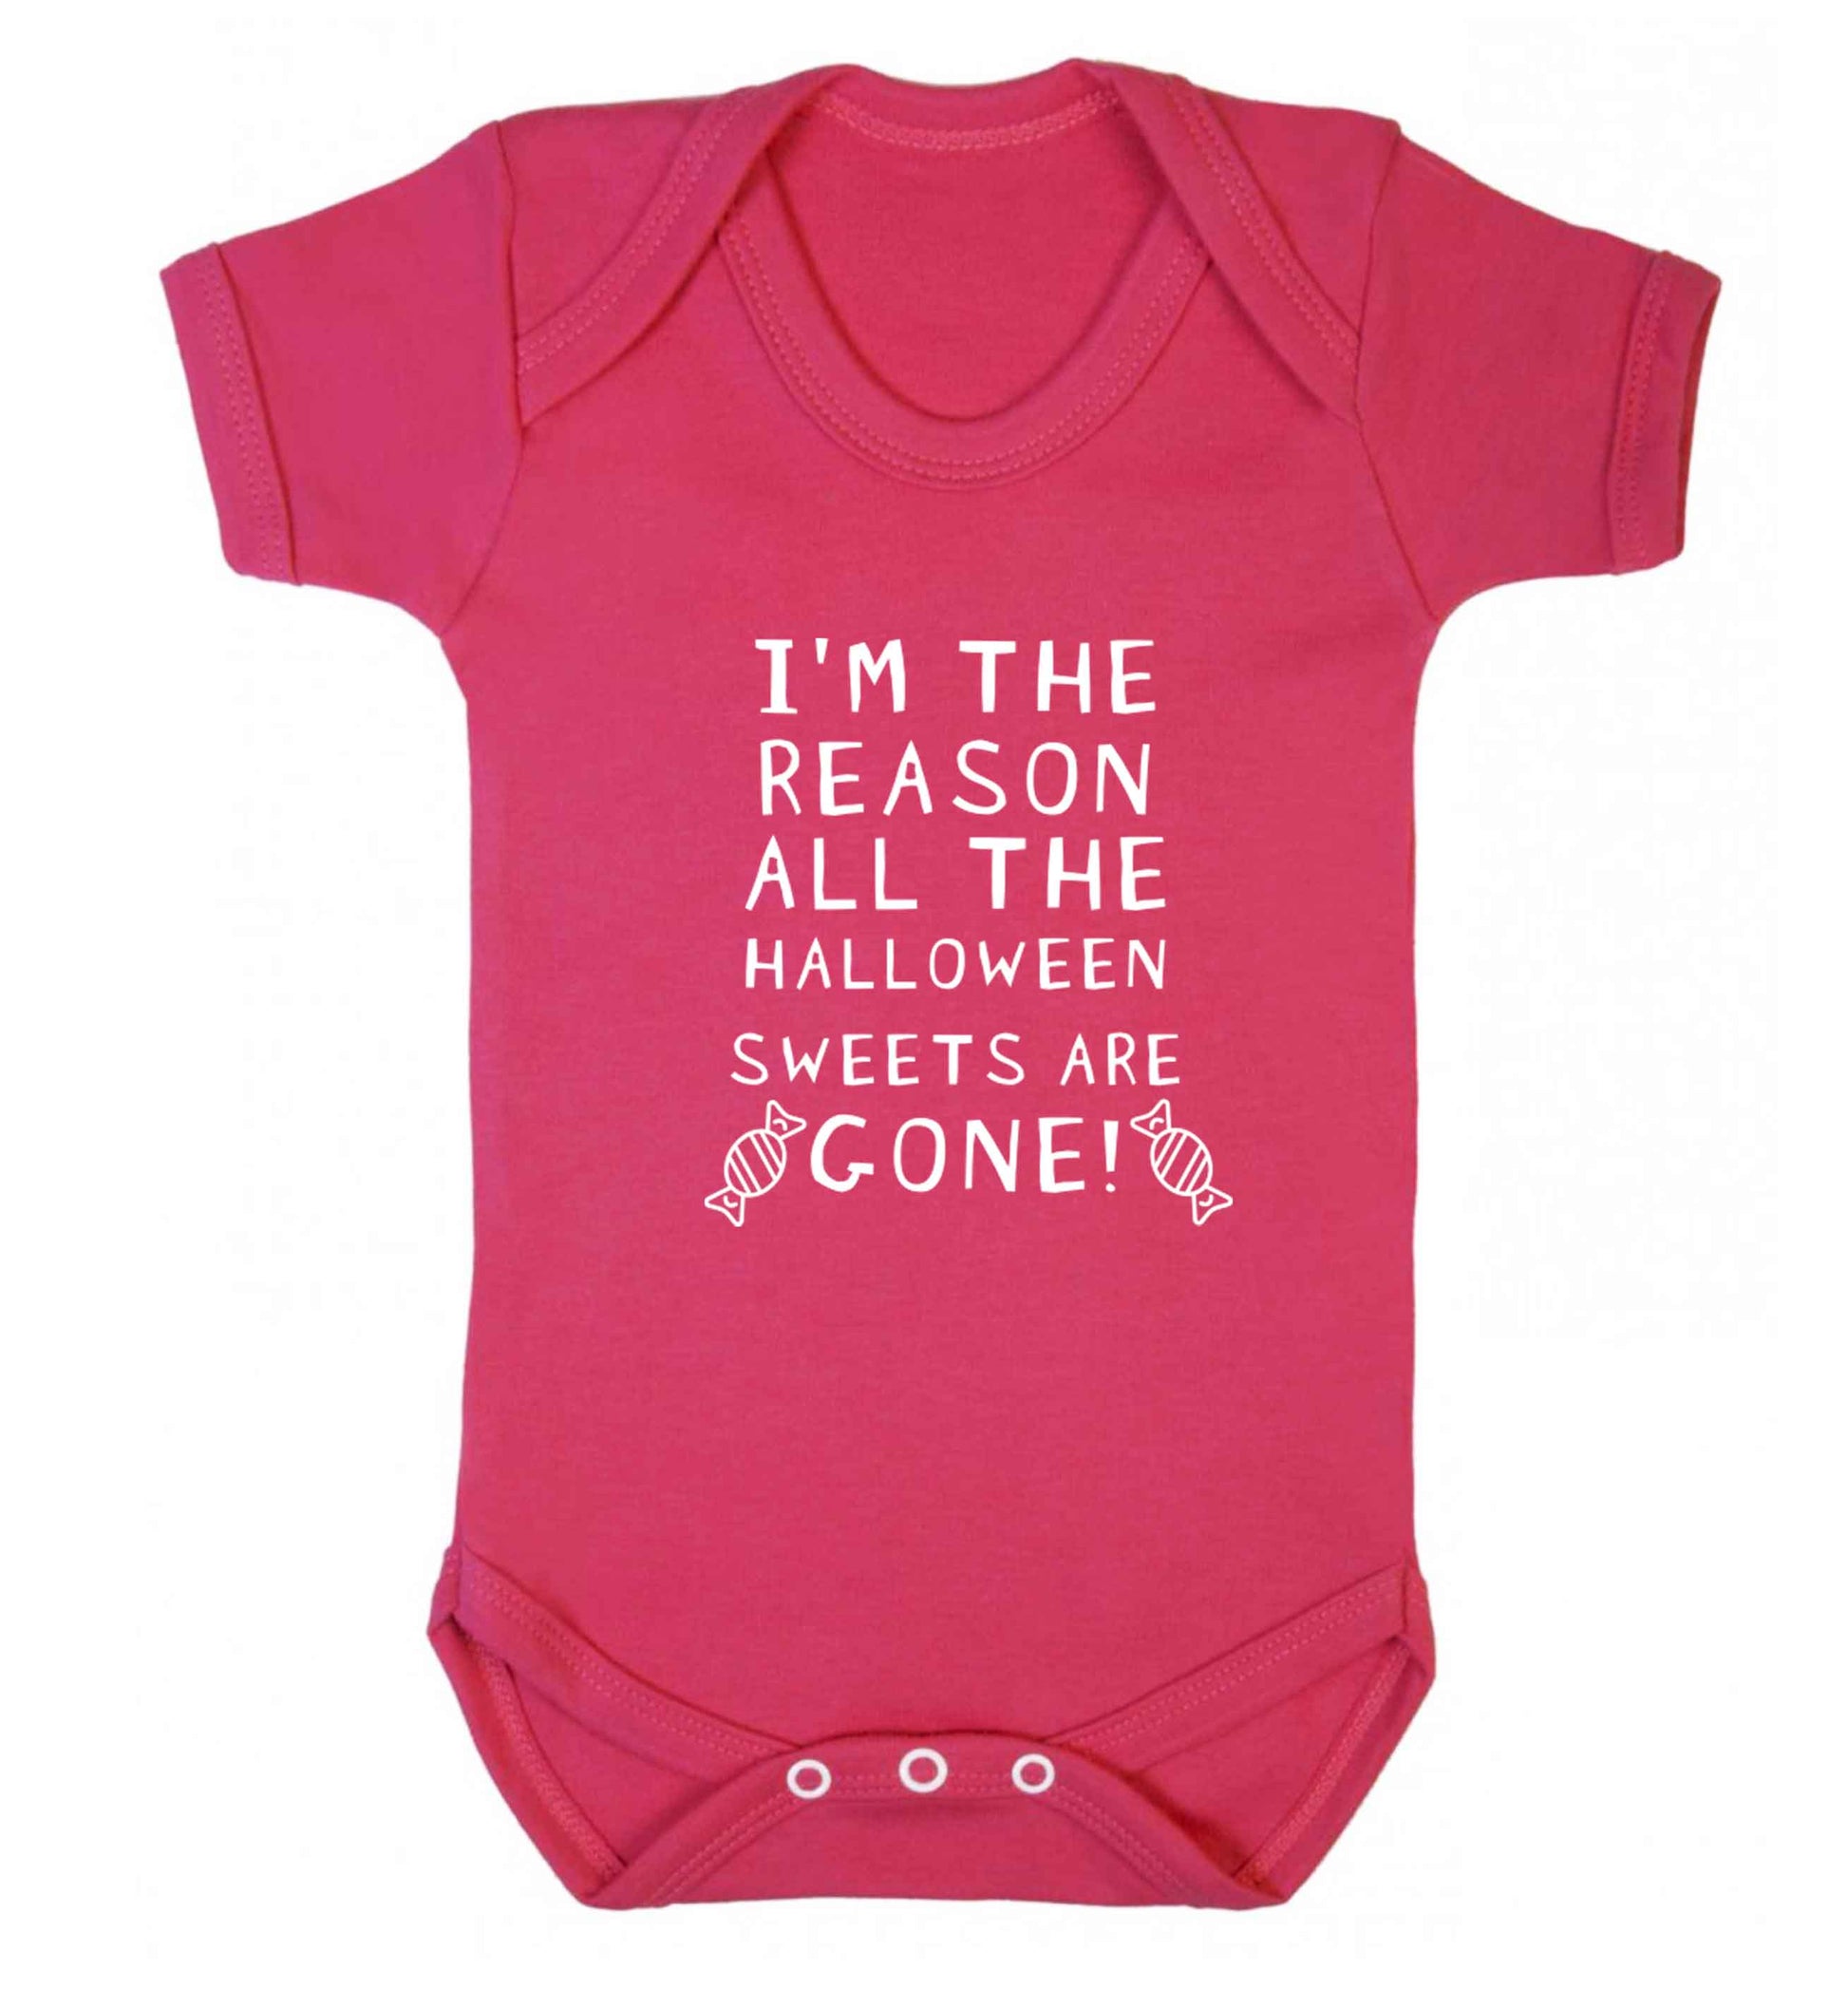 I'm the reason all of the halloween sweets are gone baby vest dark pink 18-24 months